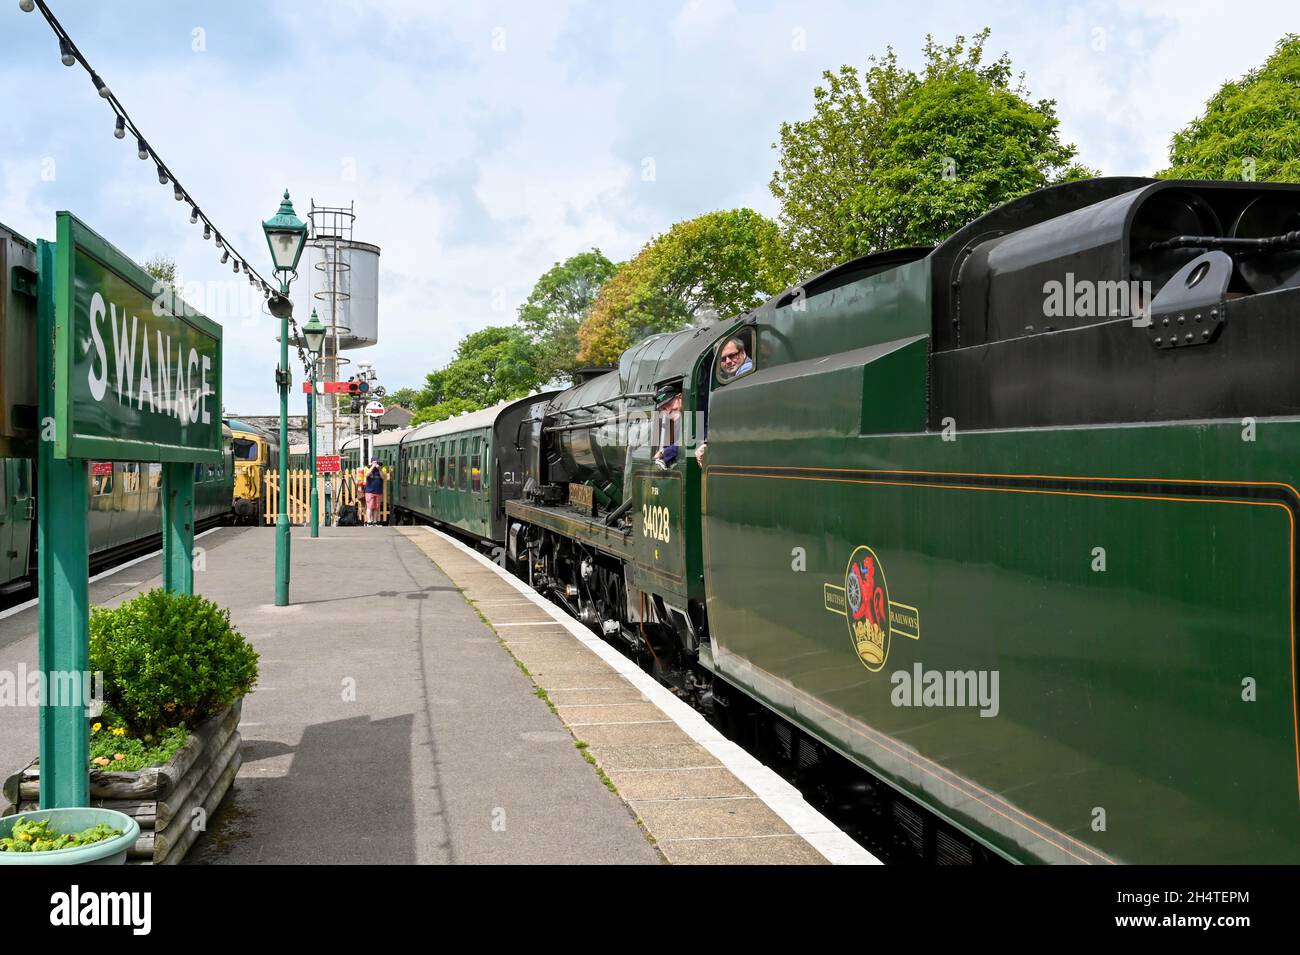 Swanage, England - June 2021: Vintage steam locomotive arriving at Swanage railway station with a train of old carriages Stock Photo